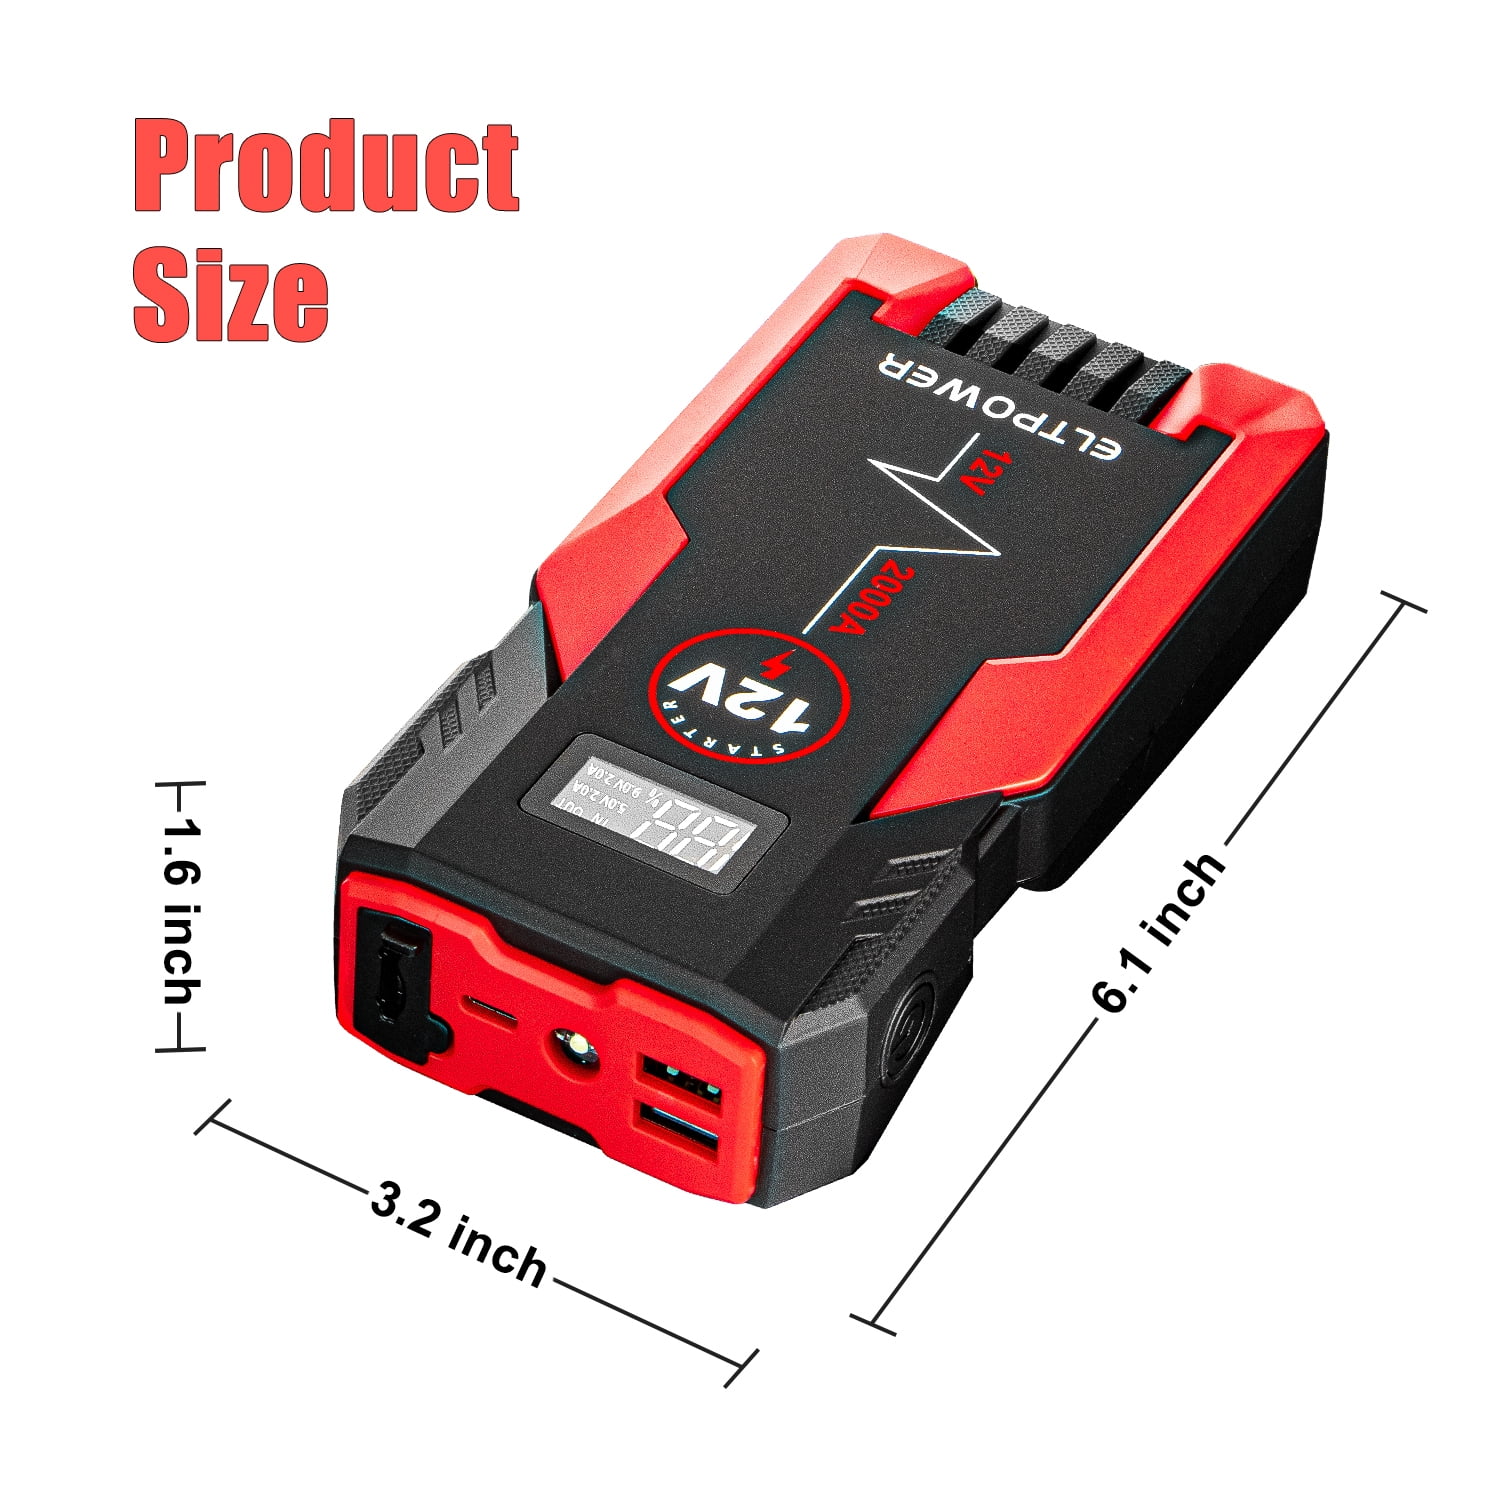 12V Portable Car Jump Starter, Peak 1200A 20000 Mah Auto Battery Booster  Power Bank, with LED Flashlight, Battery Charger, Mini Compass price in UAE,  UAE